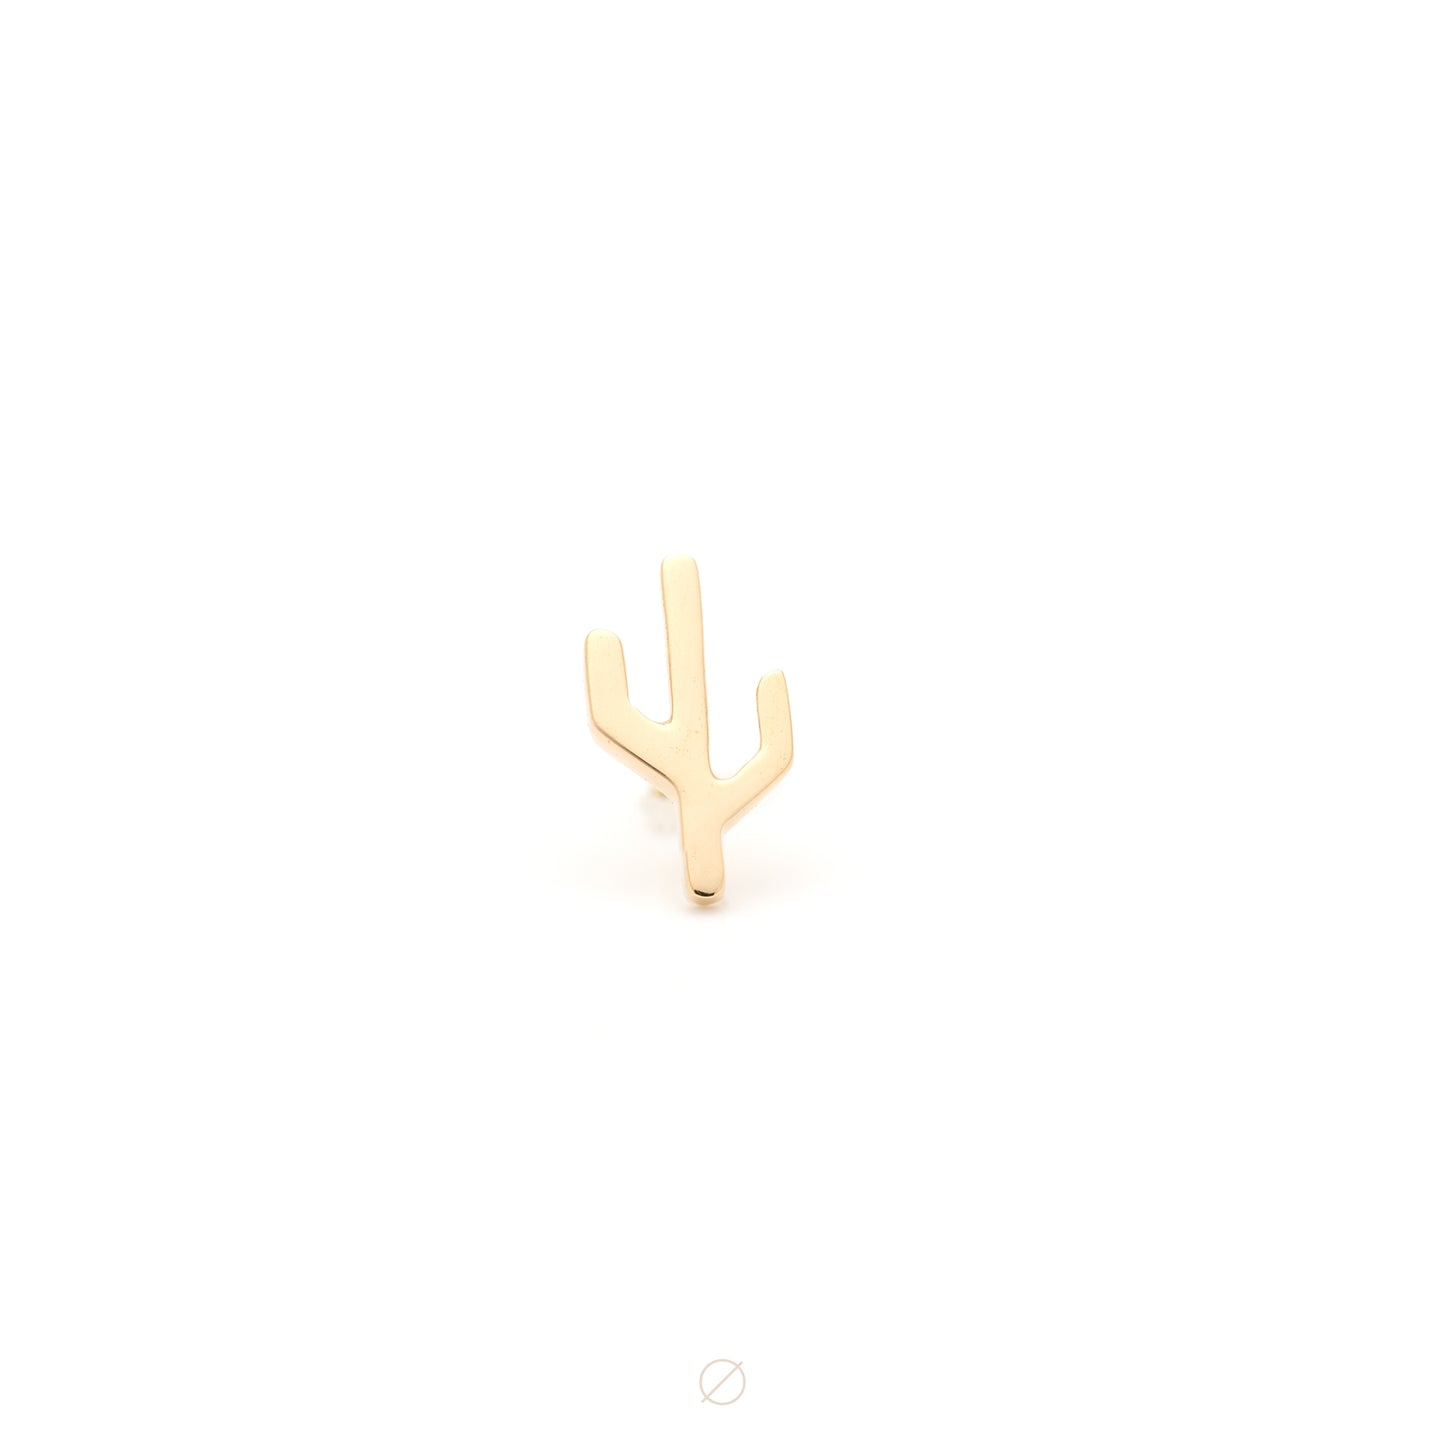 Cactus - Mojave Press-Fit End by Modern Mood